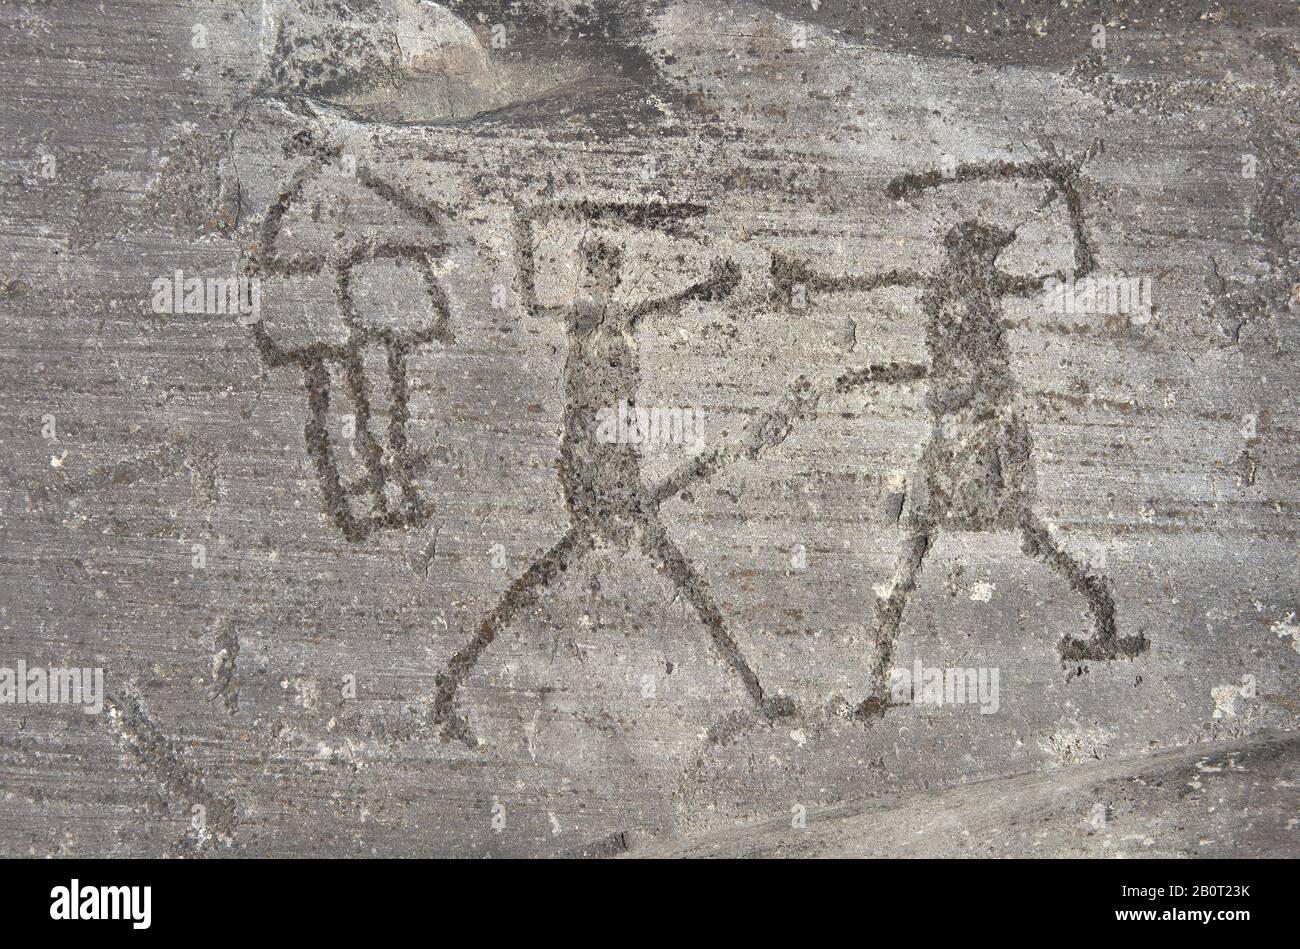 Petroglyph, rock carving, of two warriors fighting with swords carved by the ancient Camuni people in the iron age between  900-1200 BC. Rock 26-27, F Stock Photo